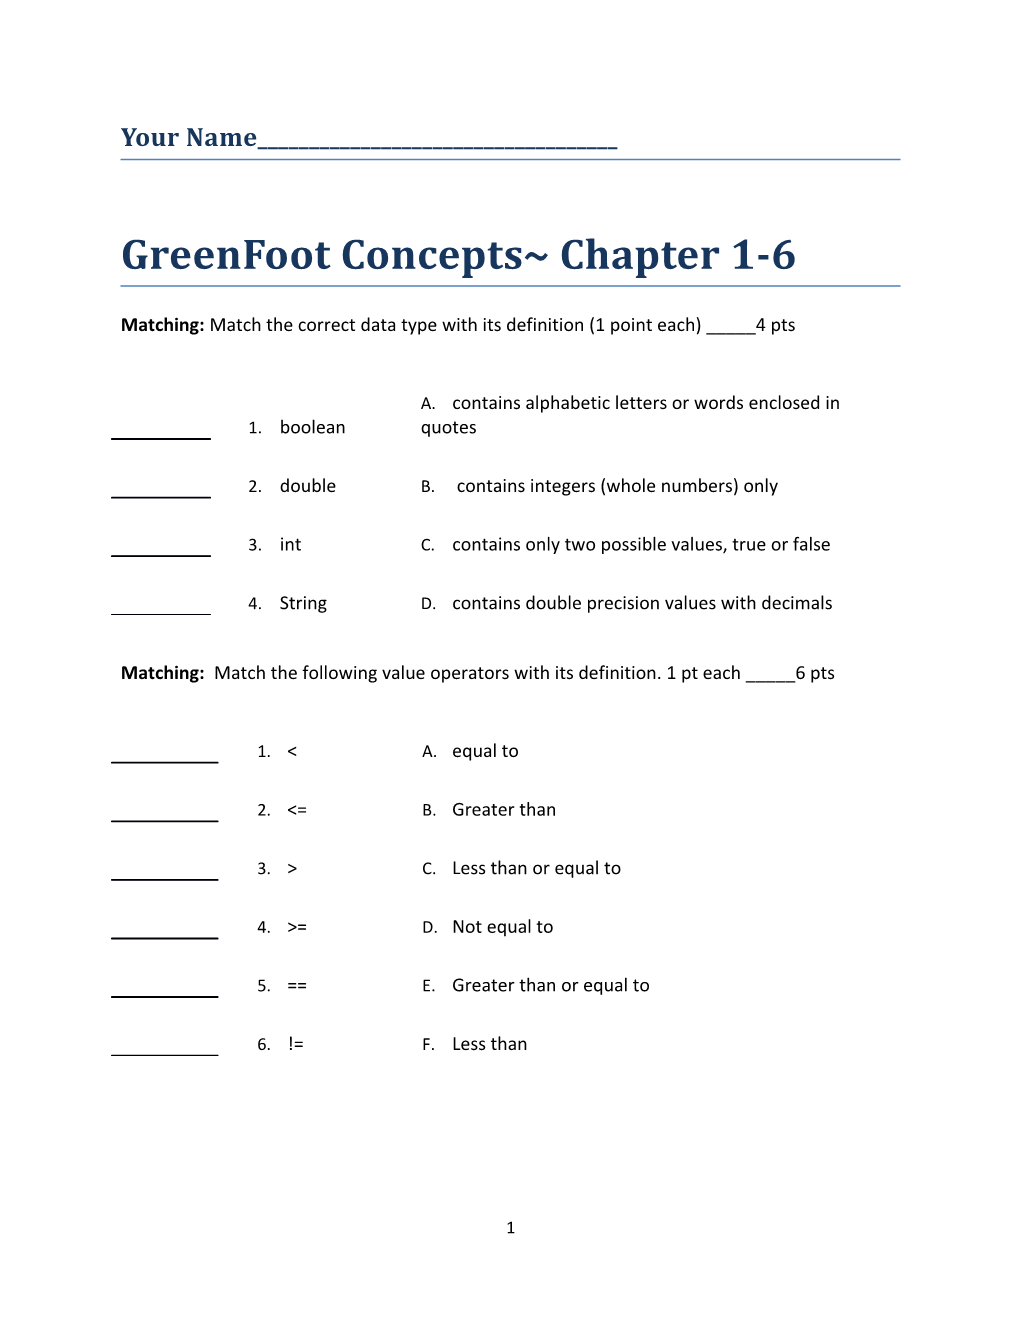 Greenfoot Concepts Chapter 1-6